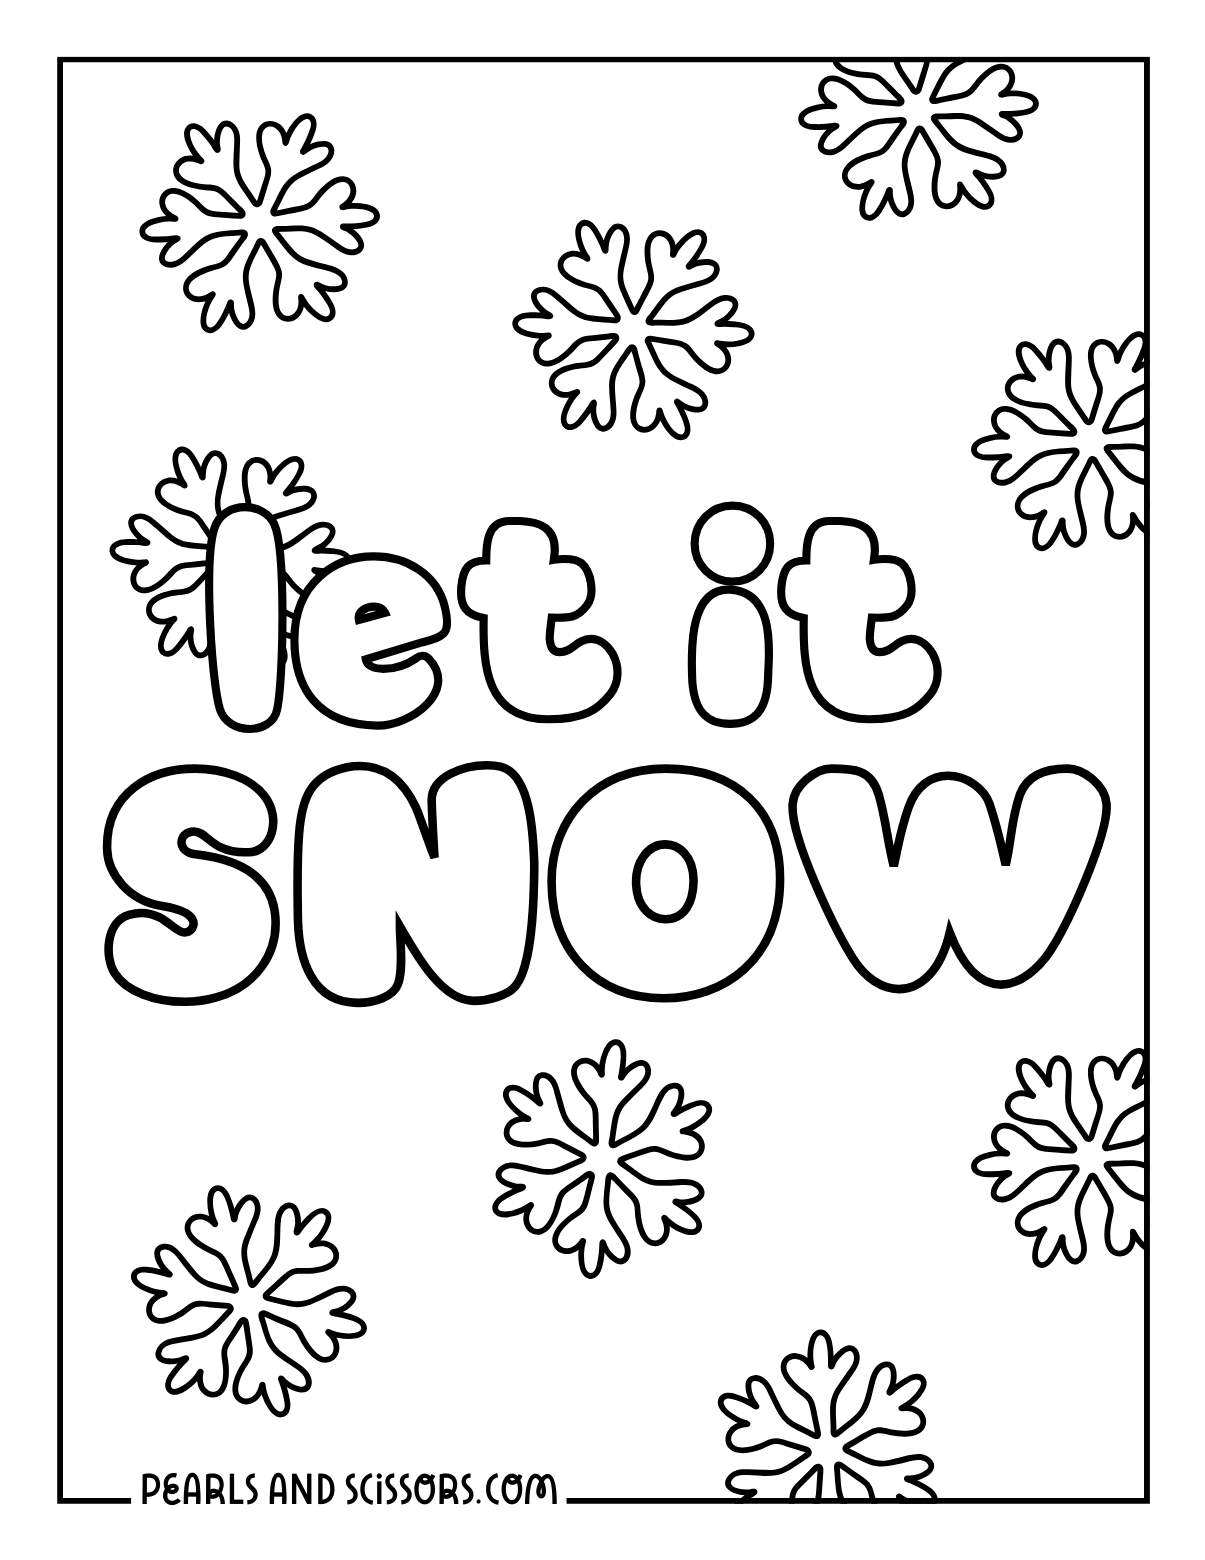 Let is snow coloring page with snowflakes.